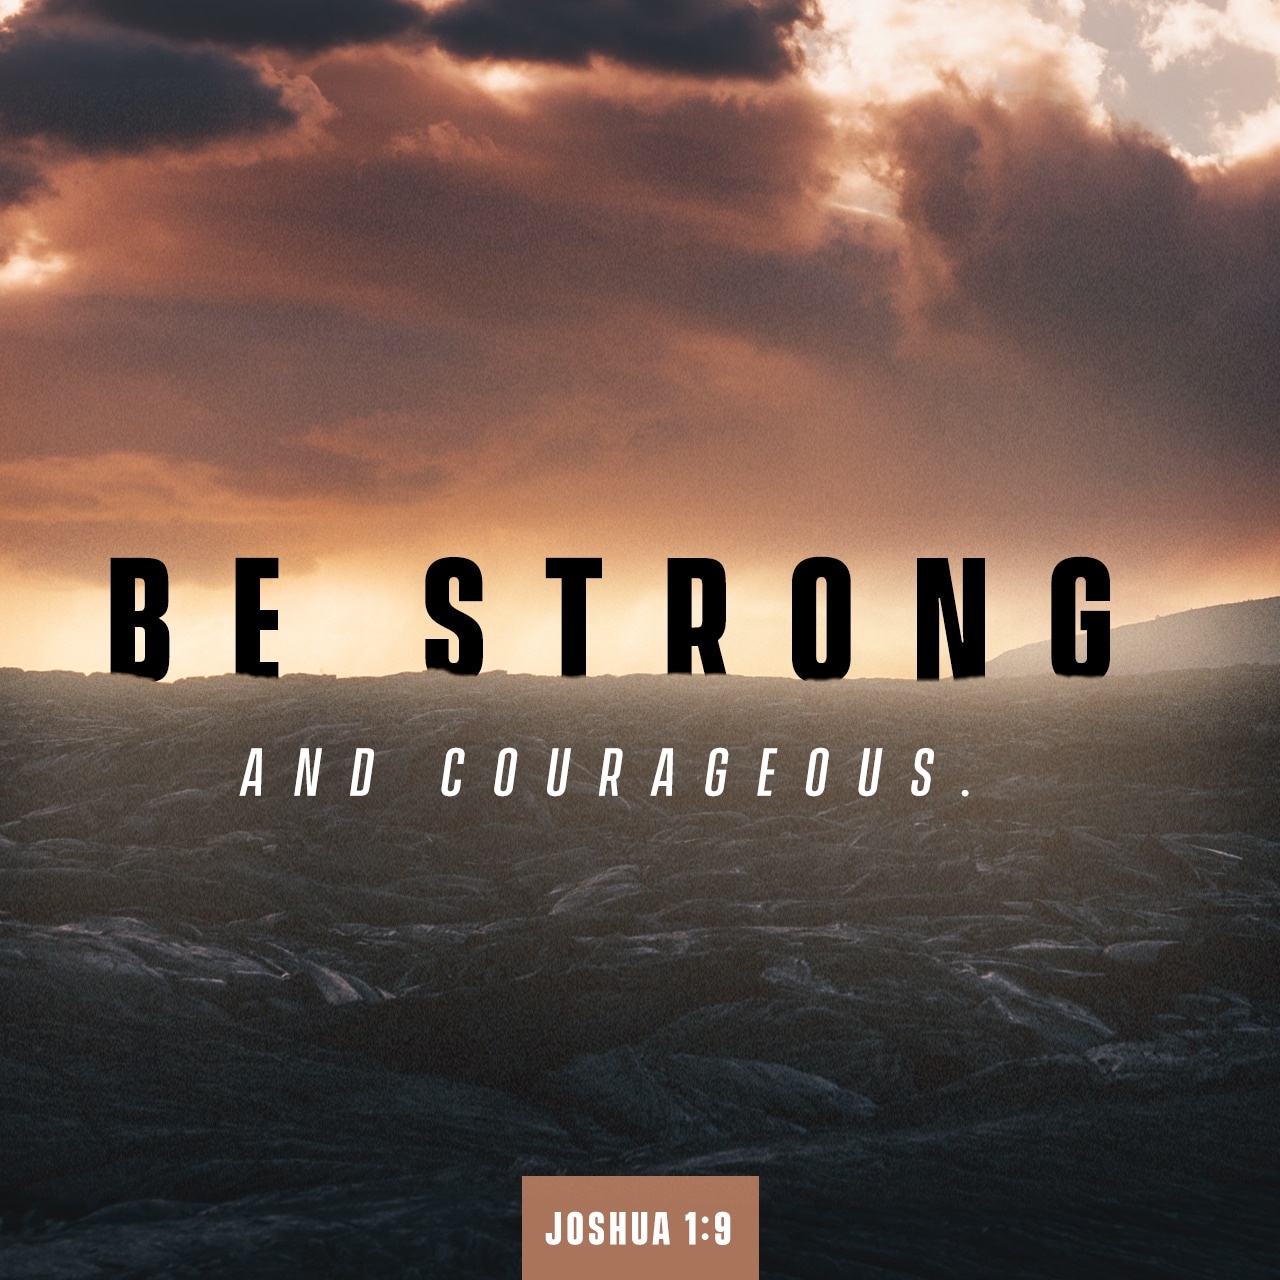 JOSHUA 1:9 Have I not commanded you? Be strong and courageous! Do not tremble or be dismayed, for the LORD your God is with you wherever you go.” | New American Standard Bible (NASB) | Download The Bible App Now